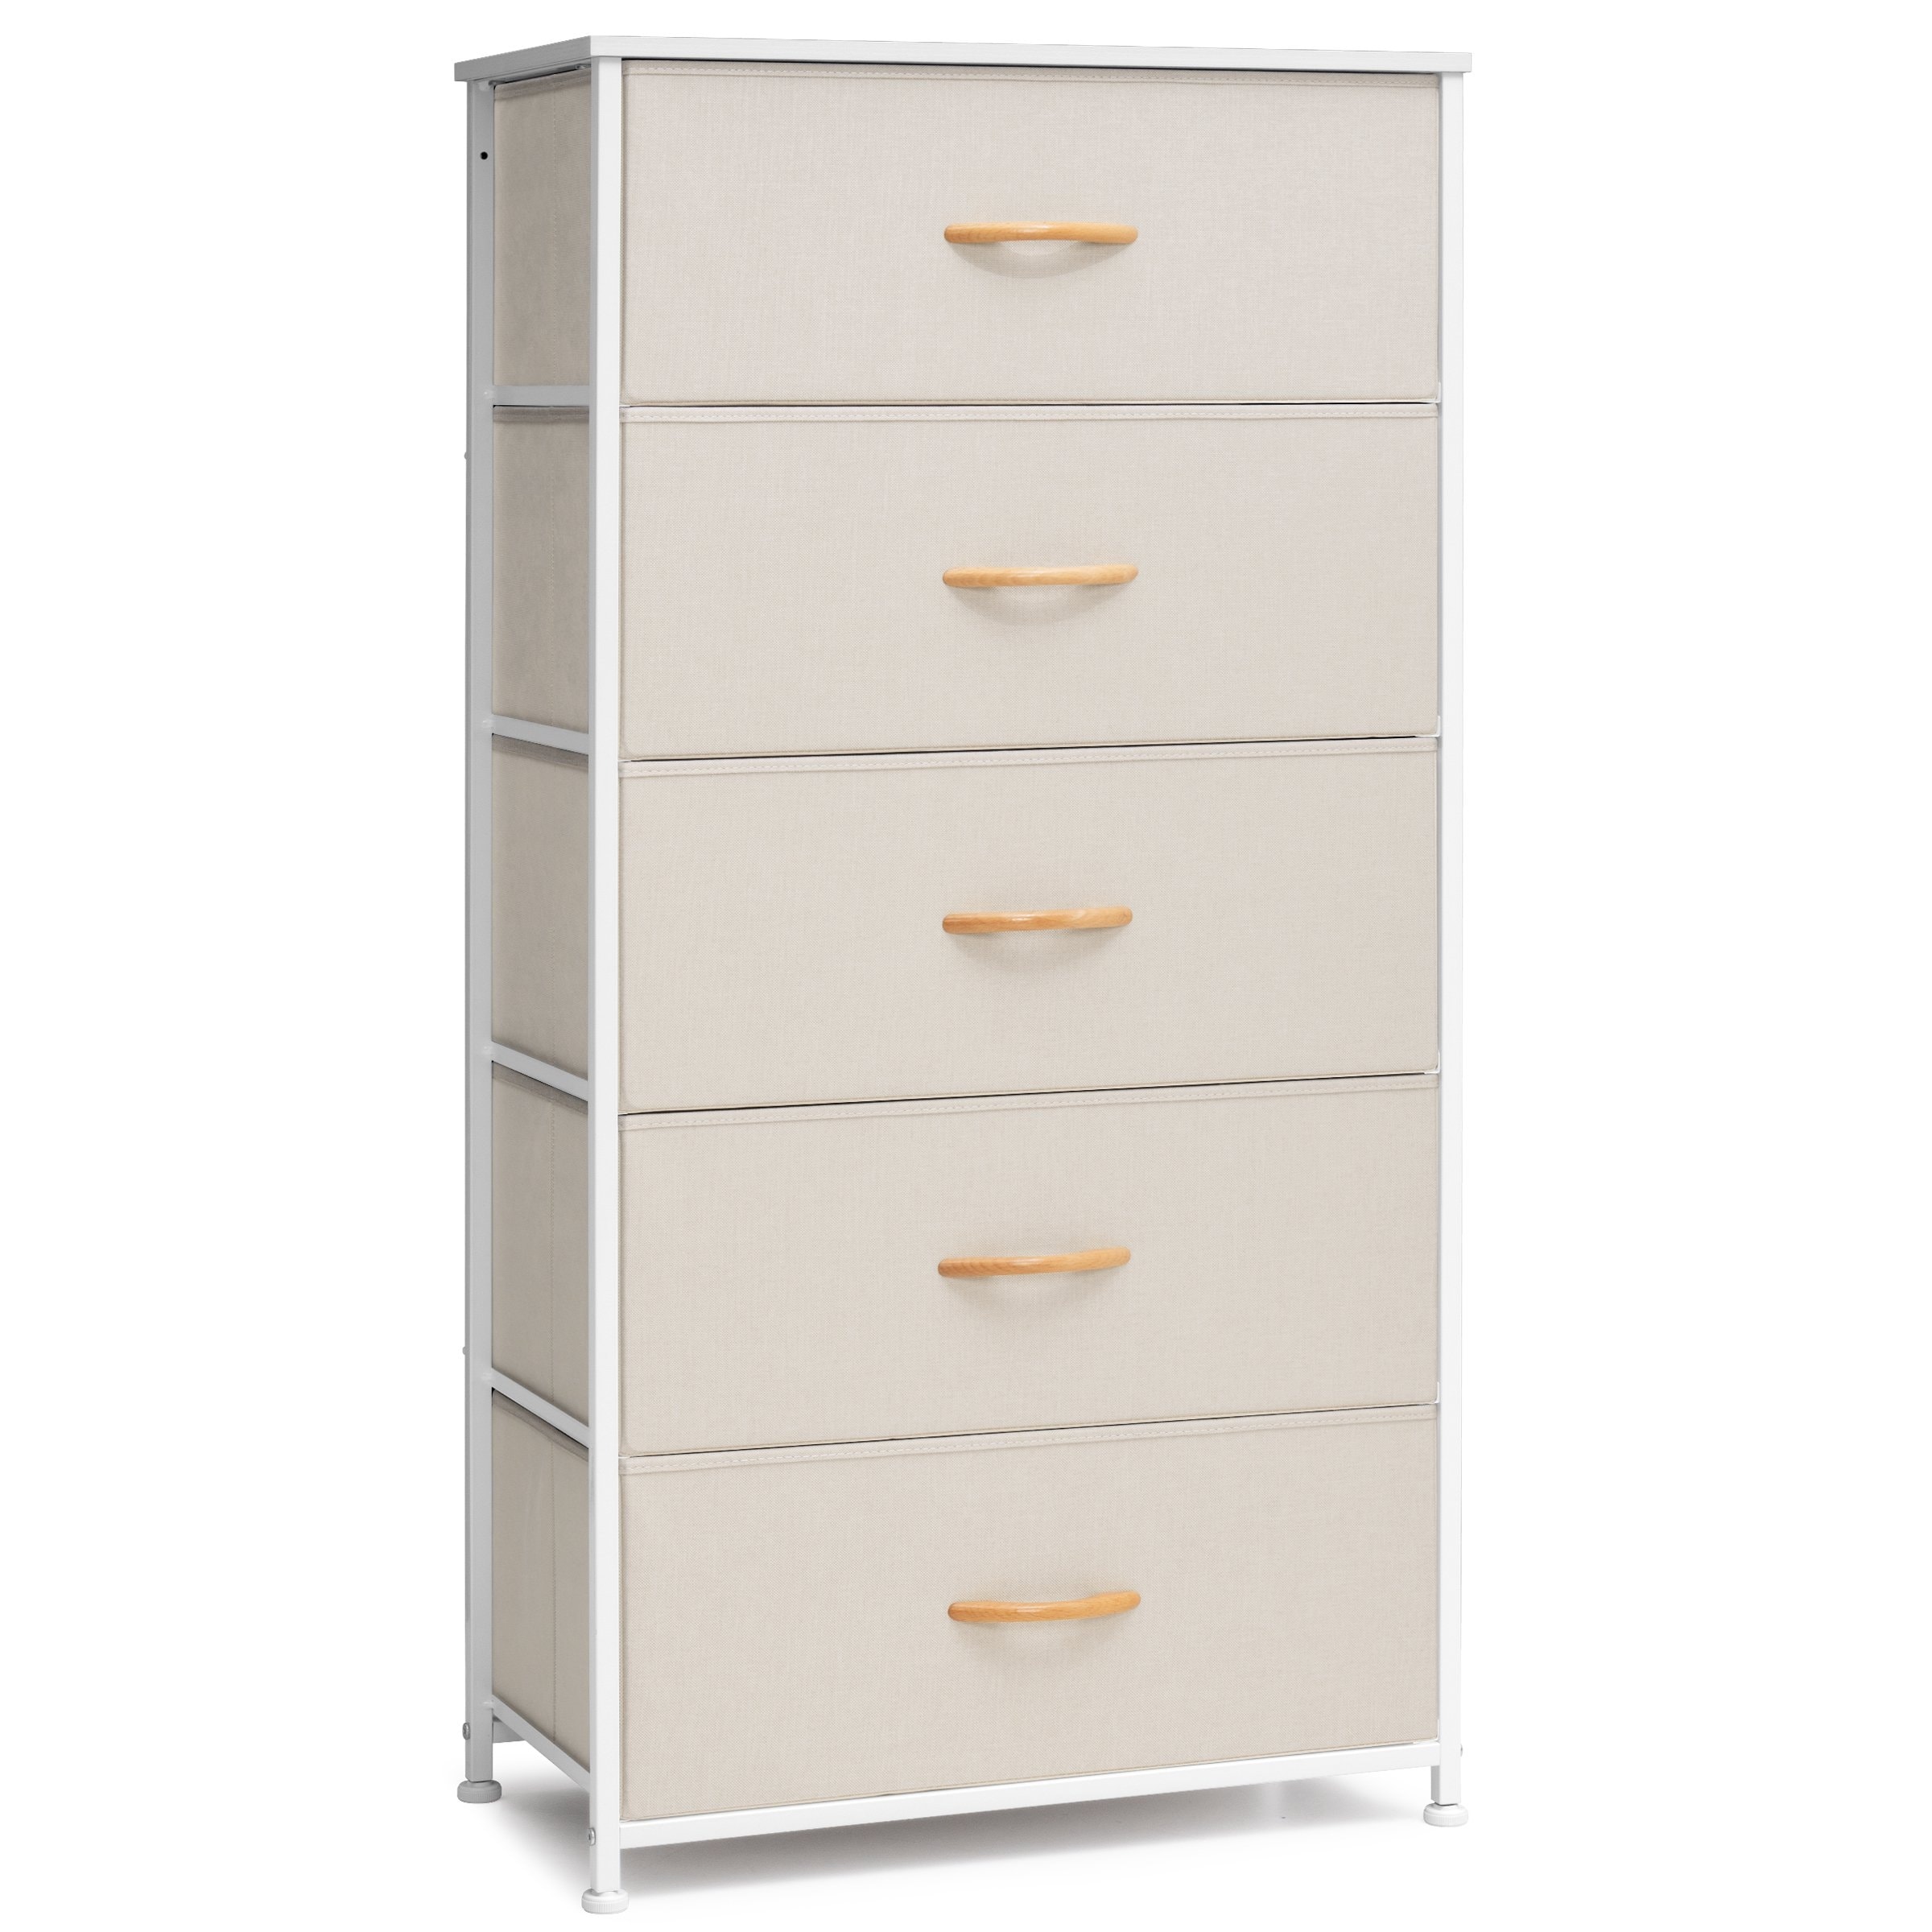 https://ak1.ostkcdn.com/images/products/is/images/direct/c2e16c099822a1860b173bc1682d51f63b1a4324/5-Drawers-Vertical-Dresser-Storage-Tower-Organizer-Unit-for-Bedroom.jpg